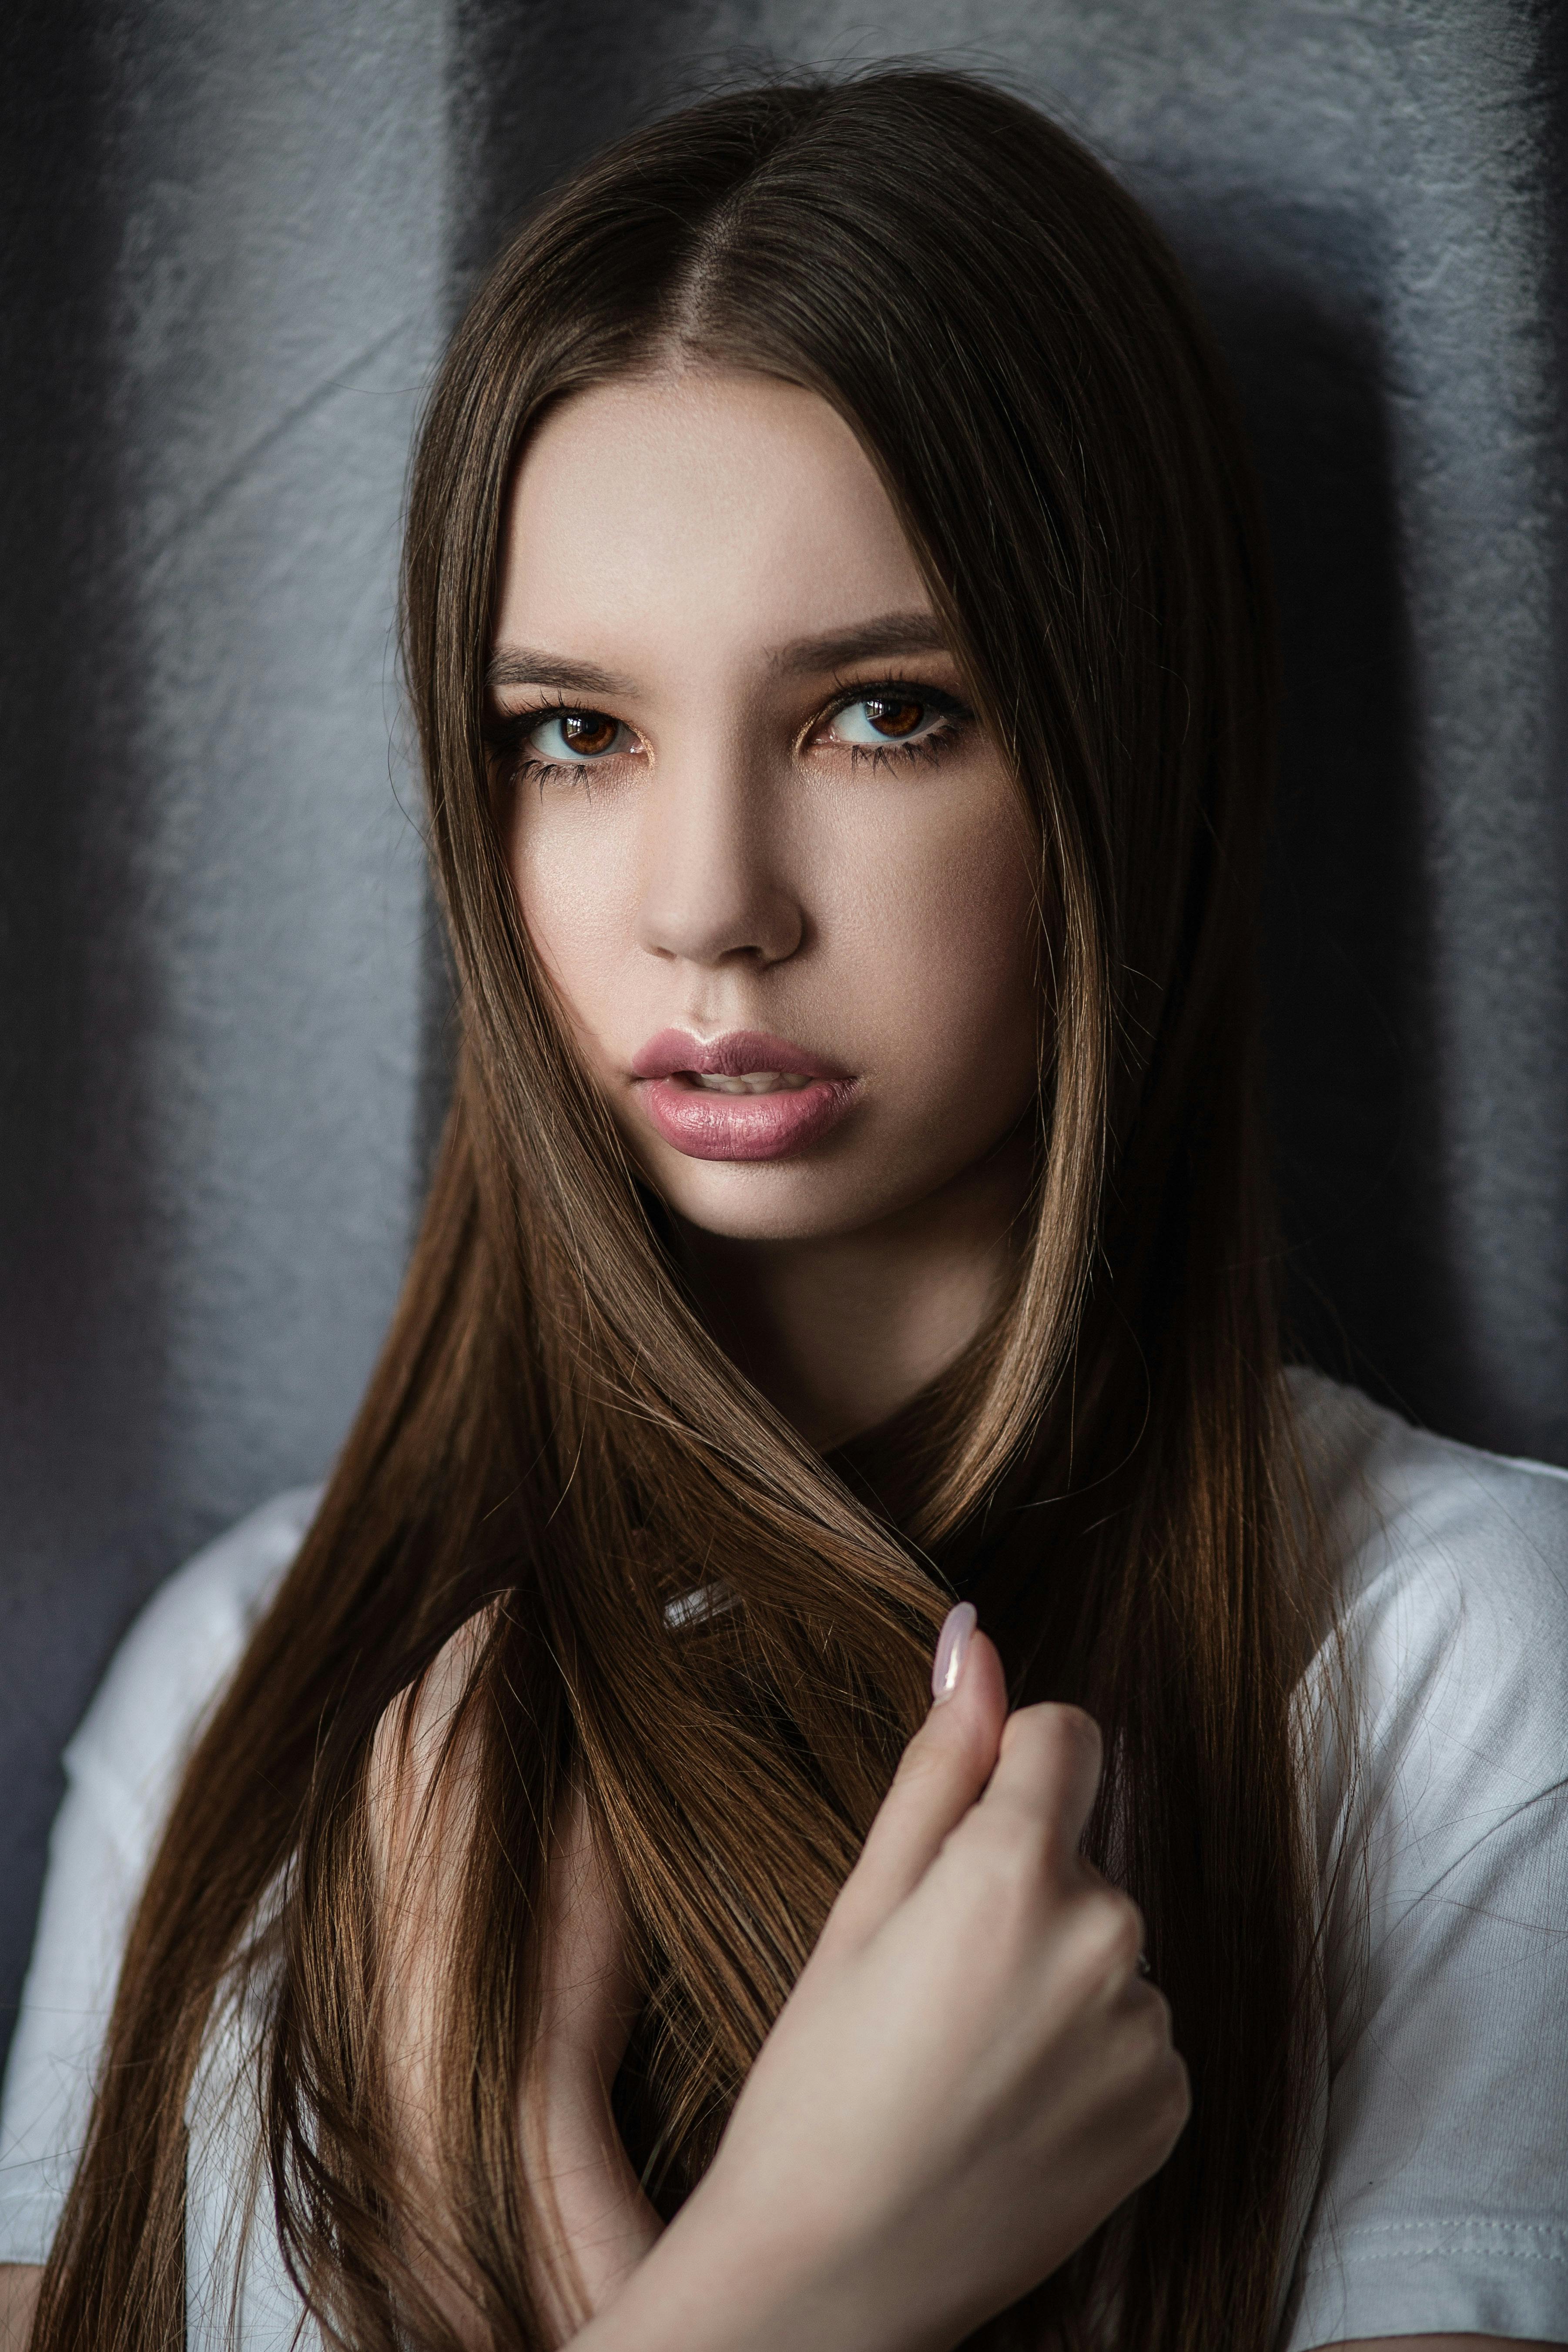 Long Hair Model Stock Photos and Images  123RF